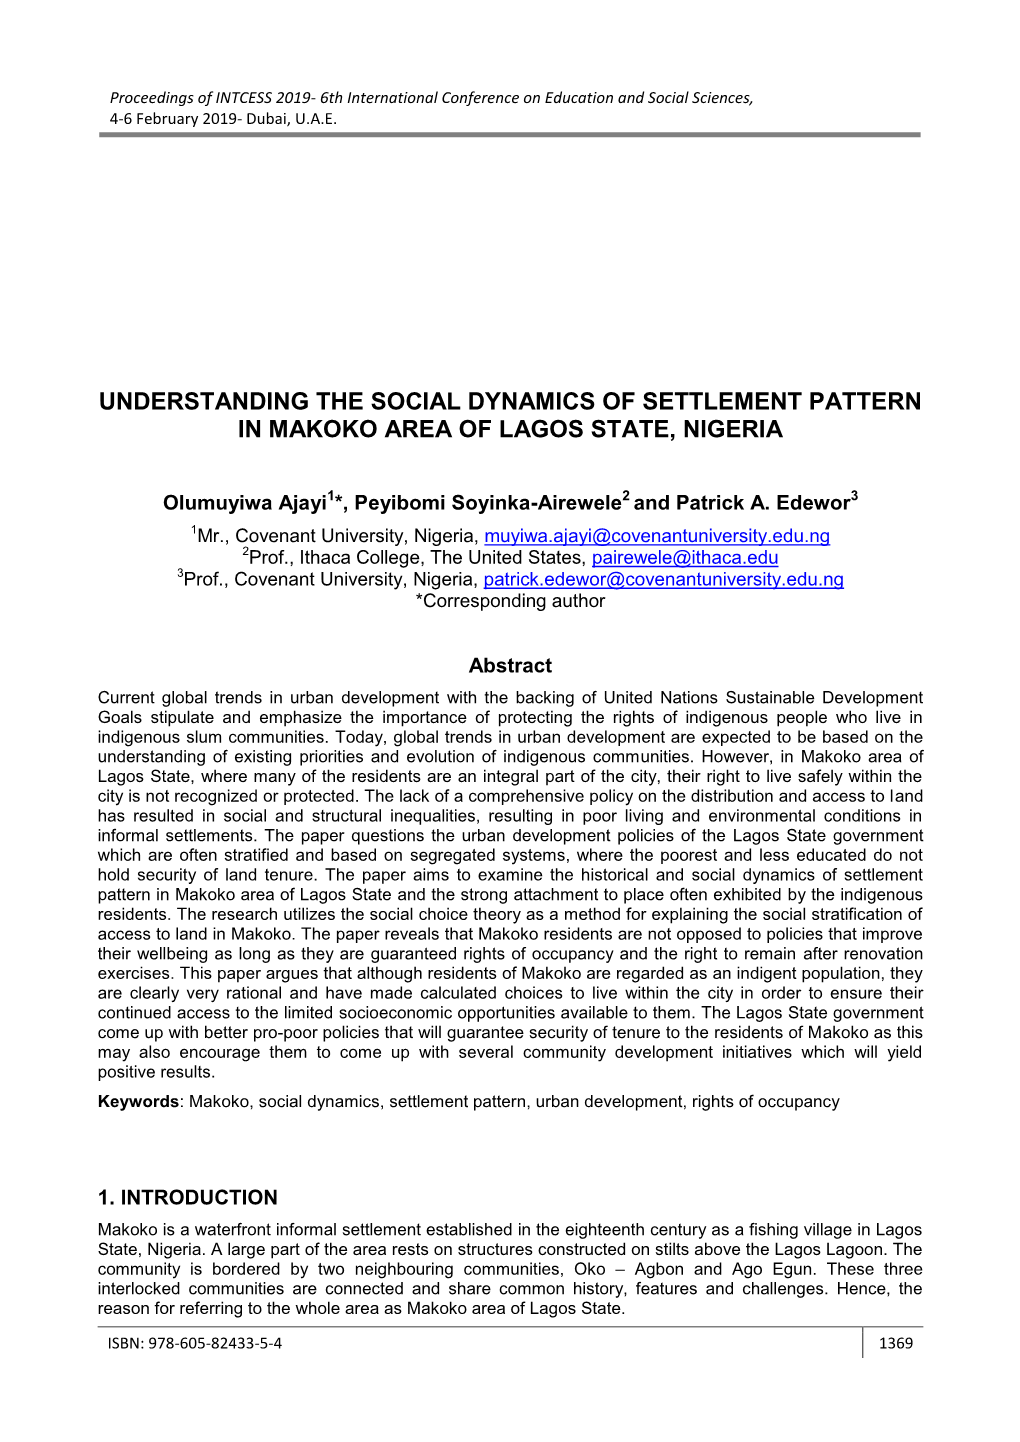 Understanding the Social Dynamics of Settlement Pattern in Makoko Area of Lagos State, Nigeria